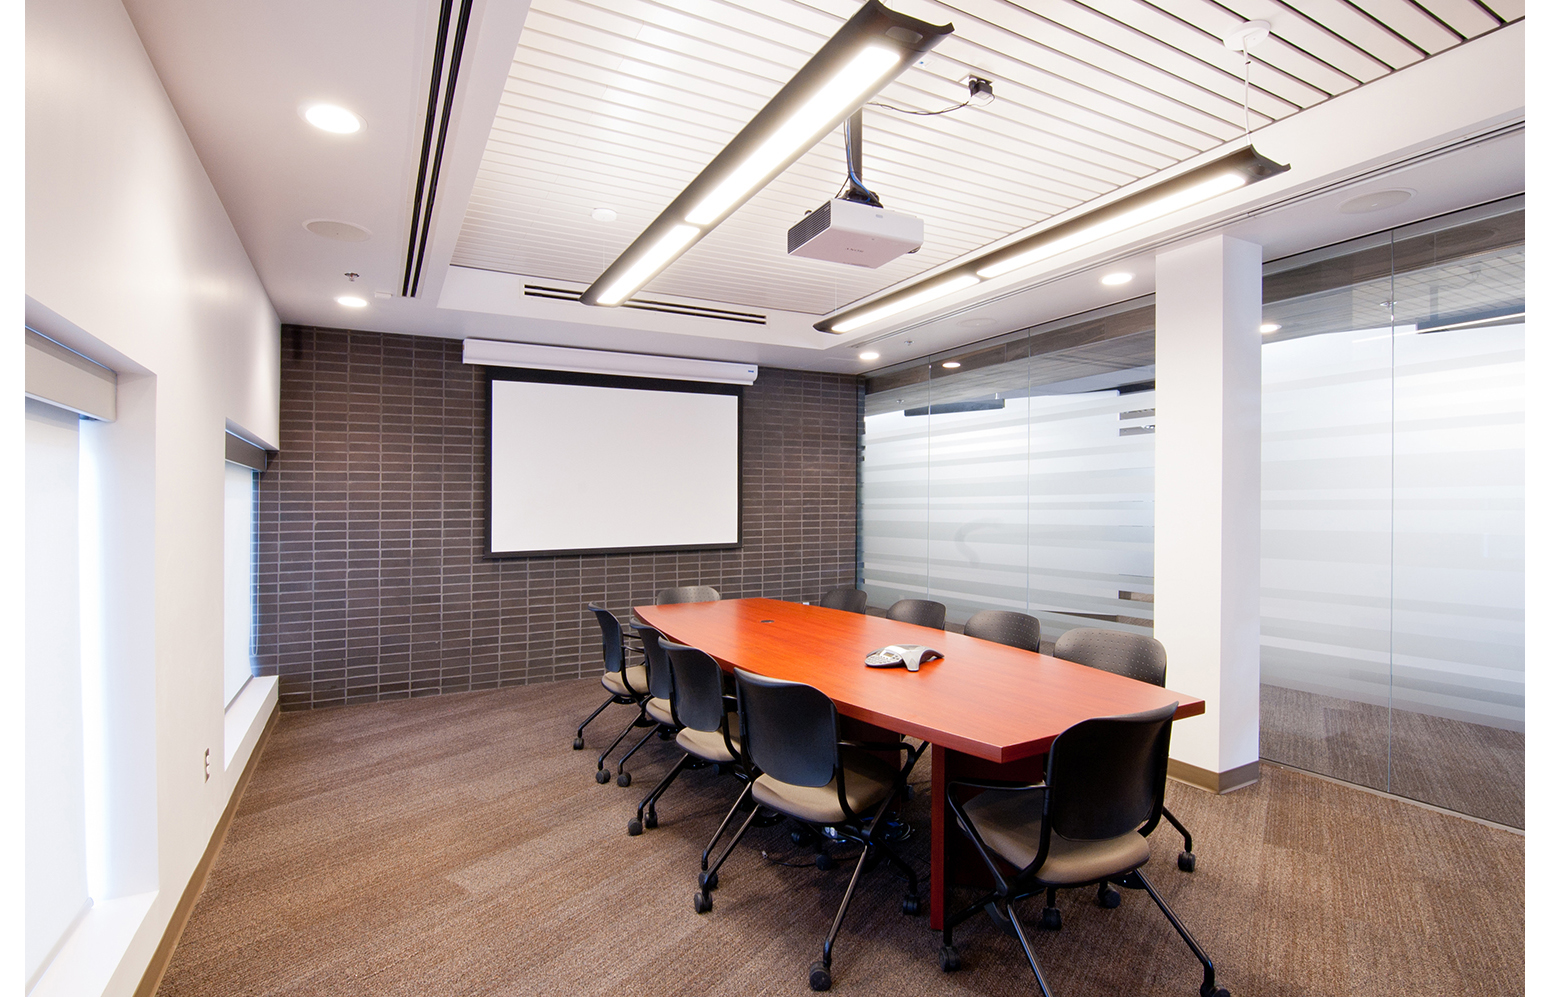  Exchange Group Offices, interior photo of meeting room / Photo: Derrick Finch 